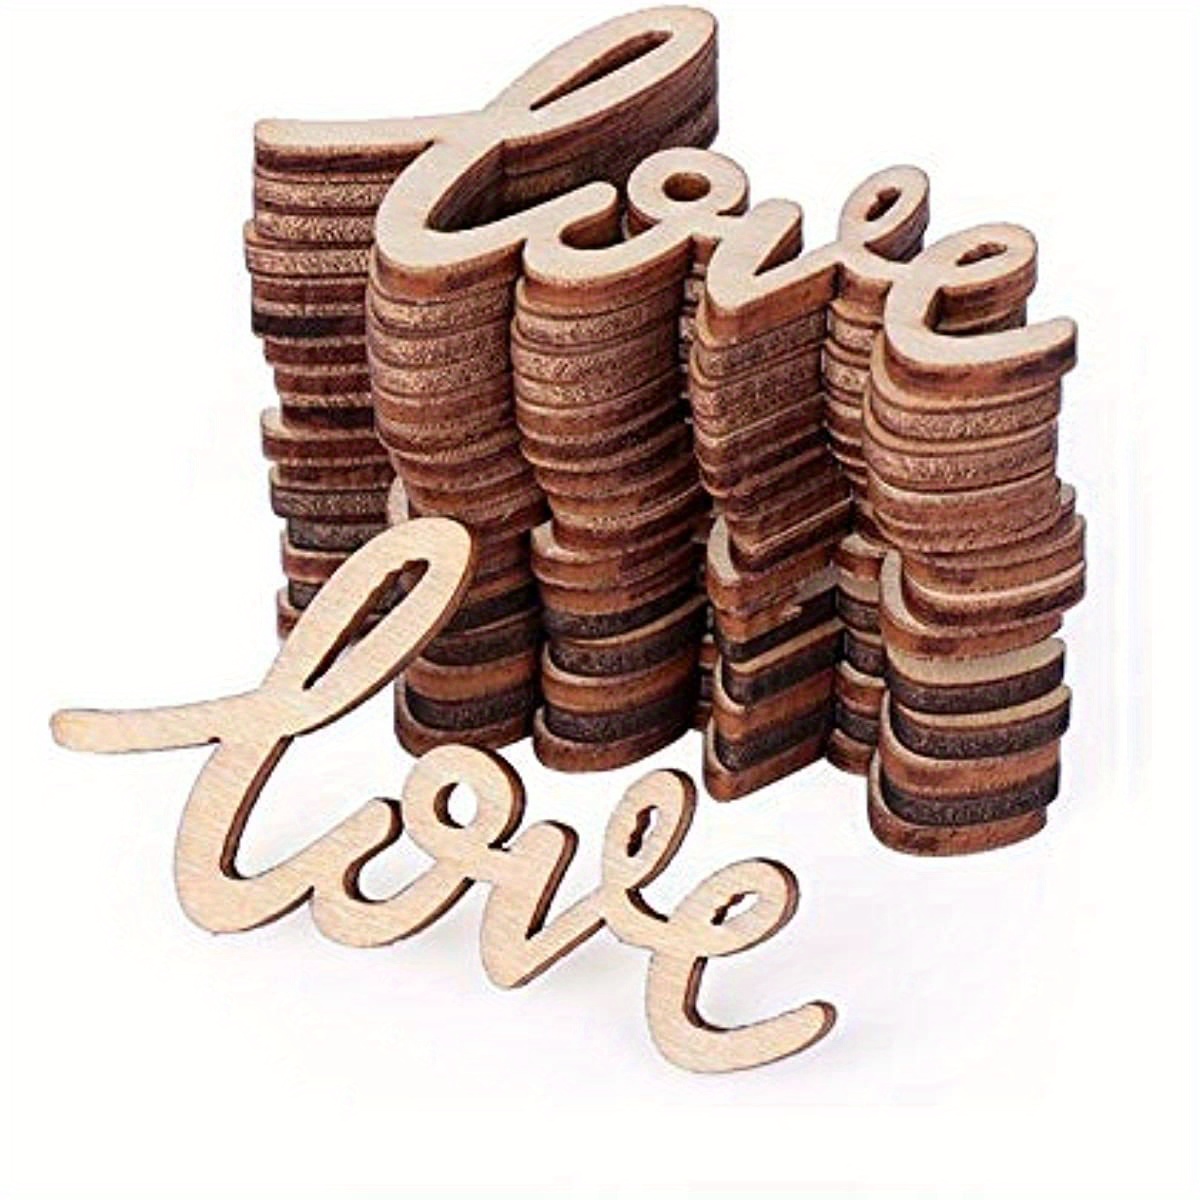 

18pcs "love" Wood Crafts Diy Cutout Wooden Slices Embellishments Gift Wood Ornaments Home Valentine's Day Decoration